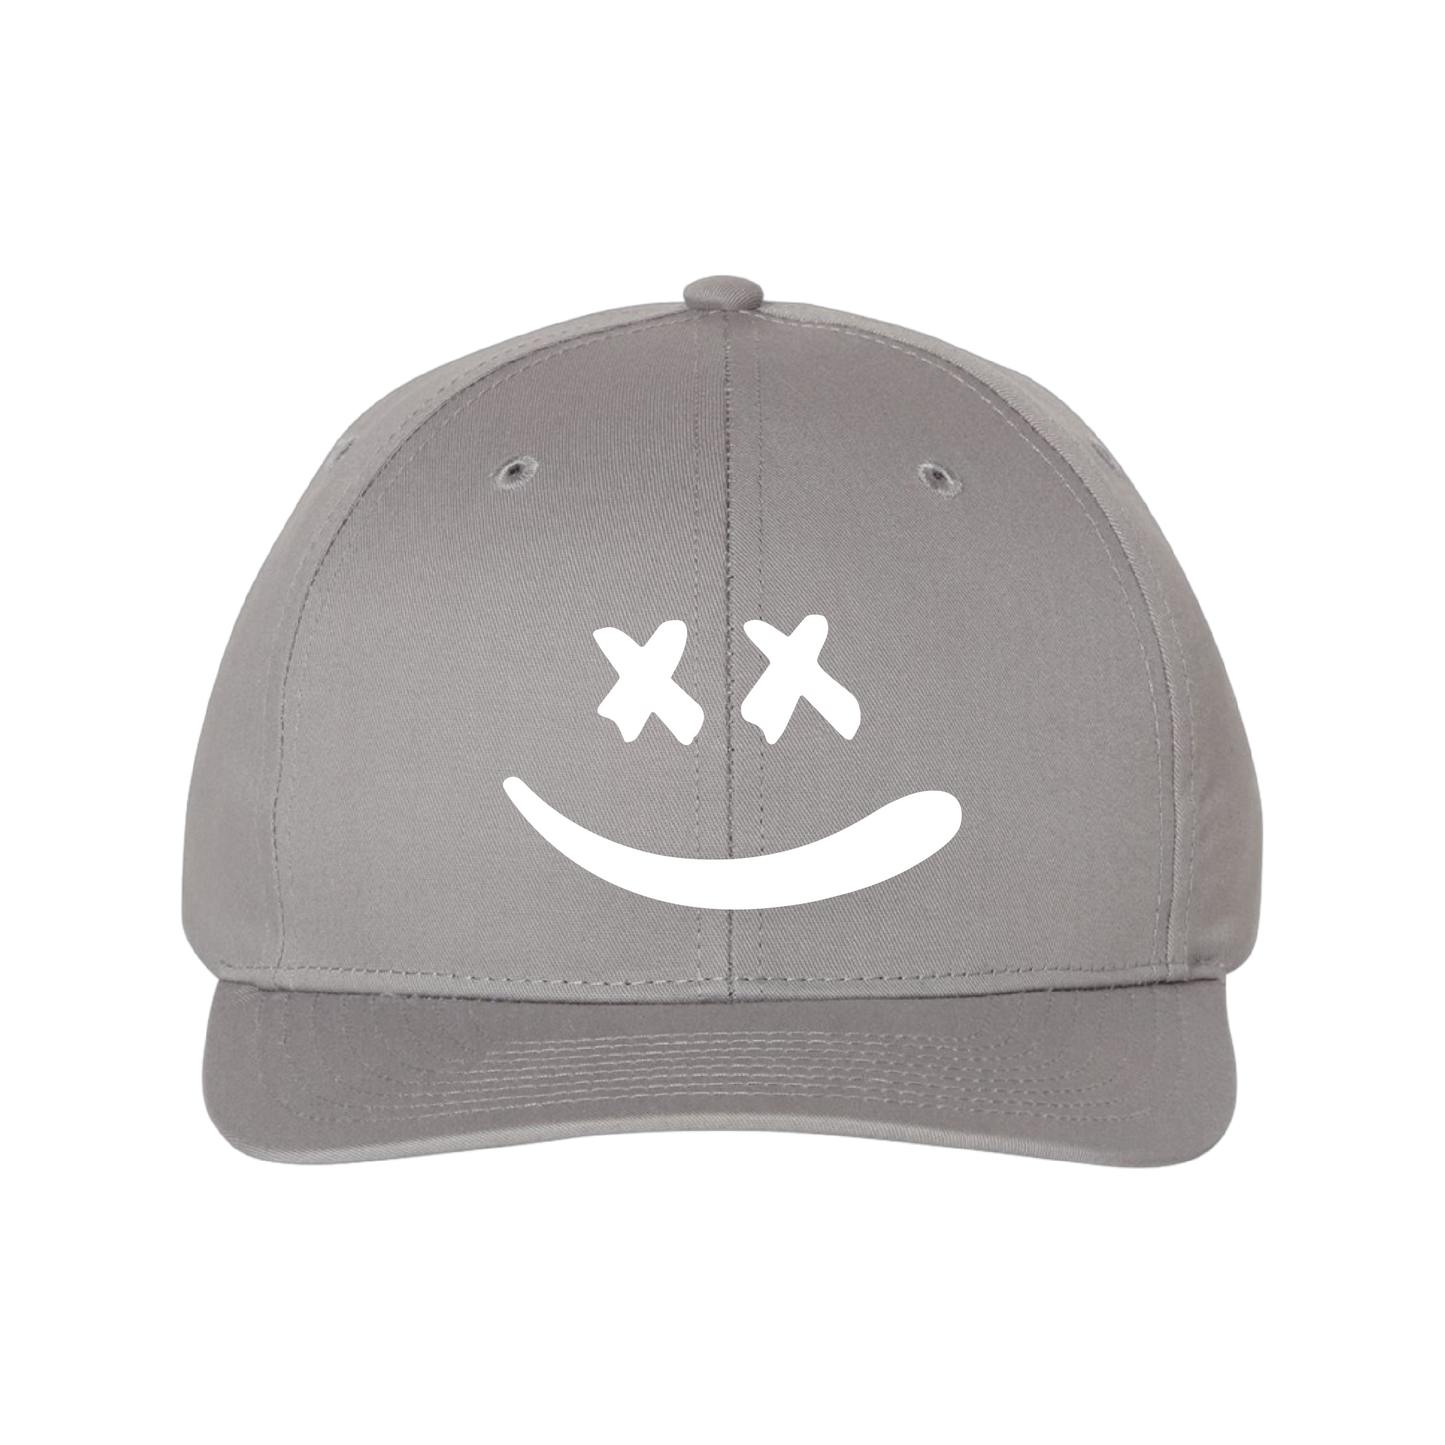 Perfectly Imperfect Smiley Hat